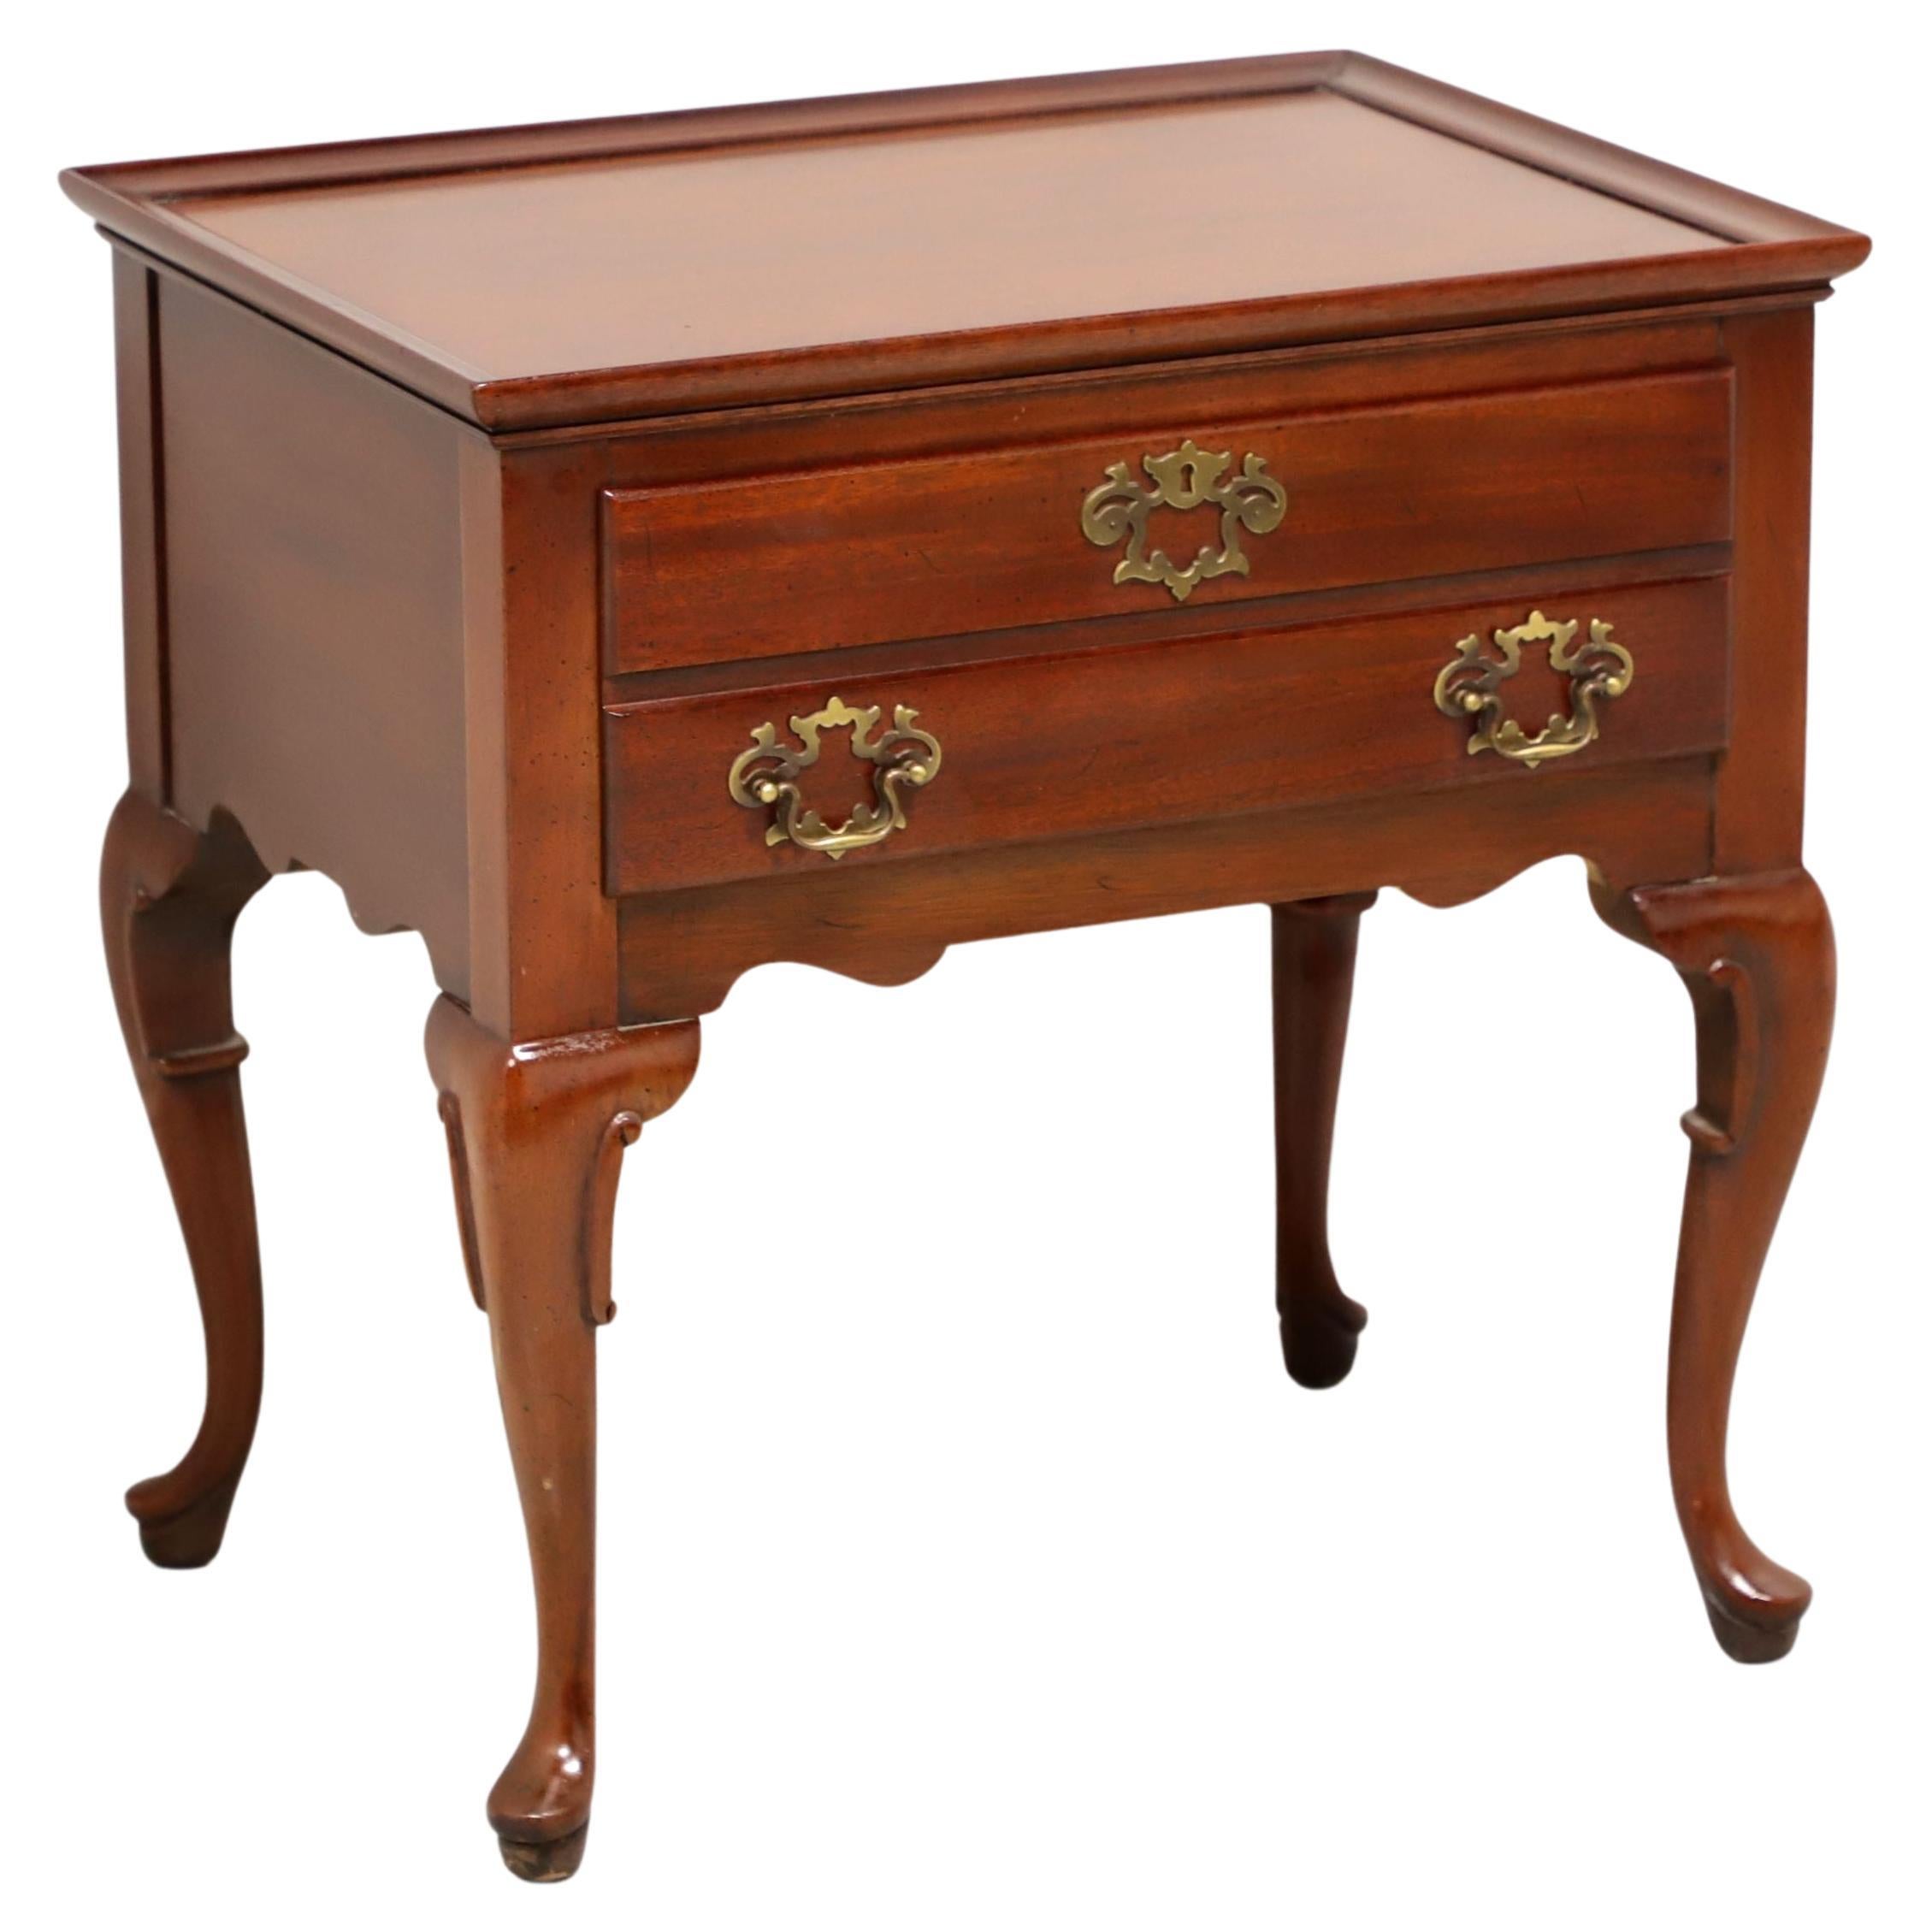 HICKORY CHAIR James River Mahogany Queen Anne Nightstand / Accent Side Table - B